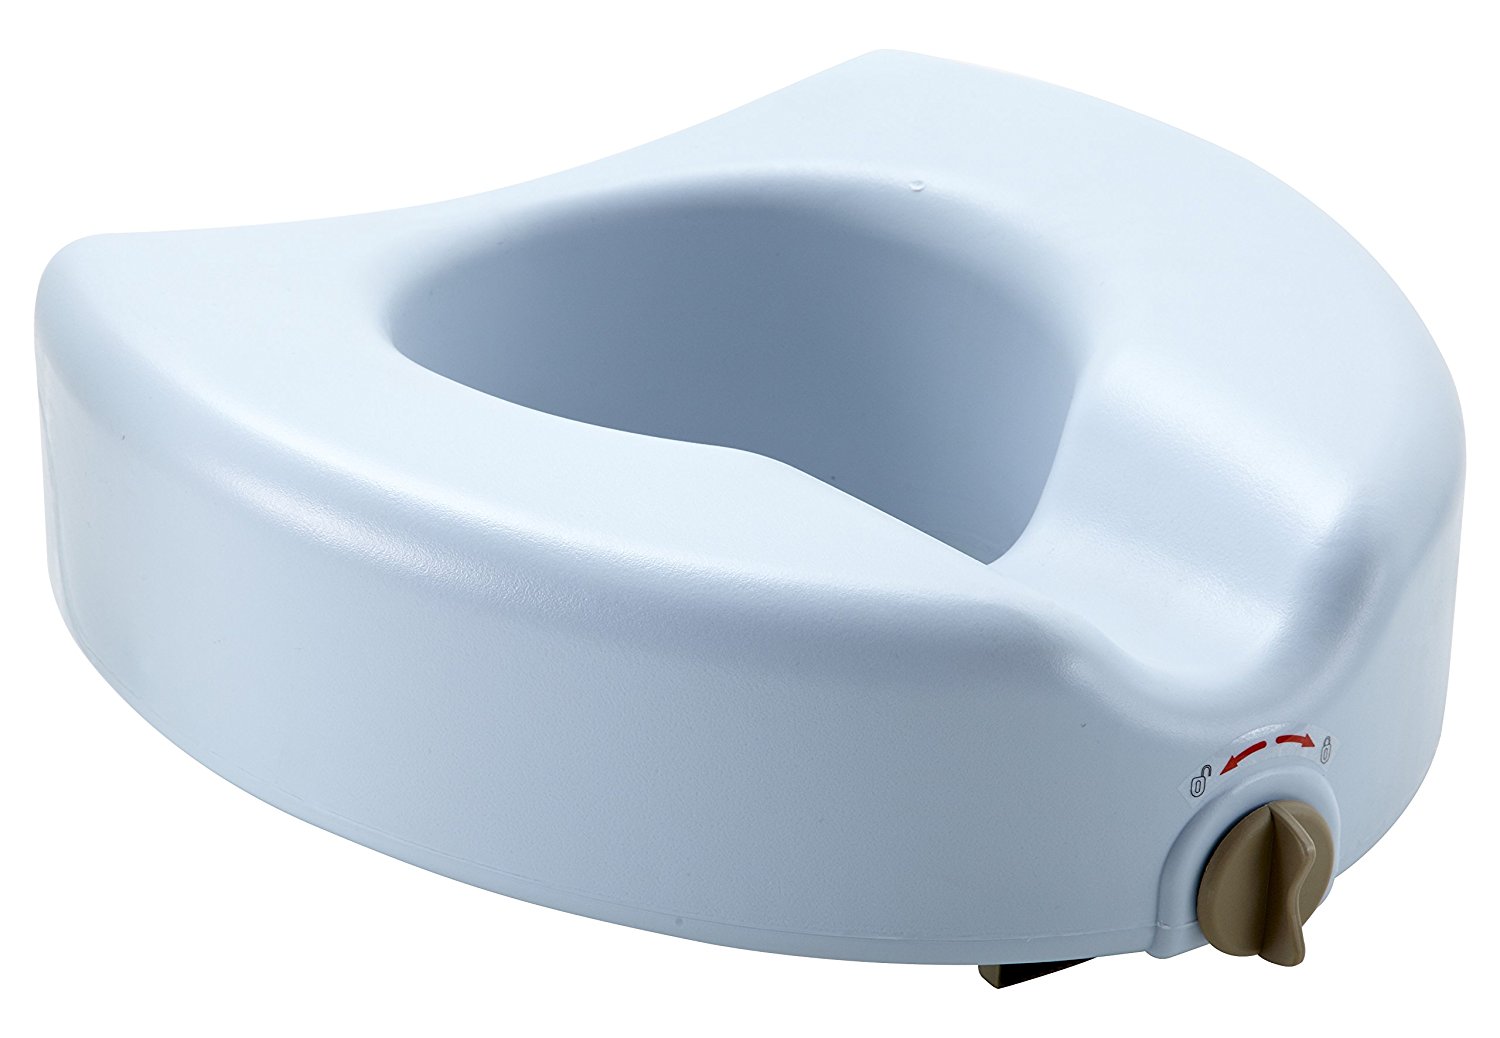 Medline Locking Elevated Toilet Seat without Arms, Microban